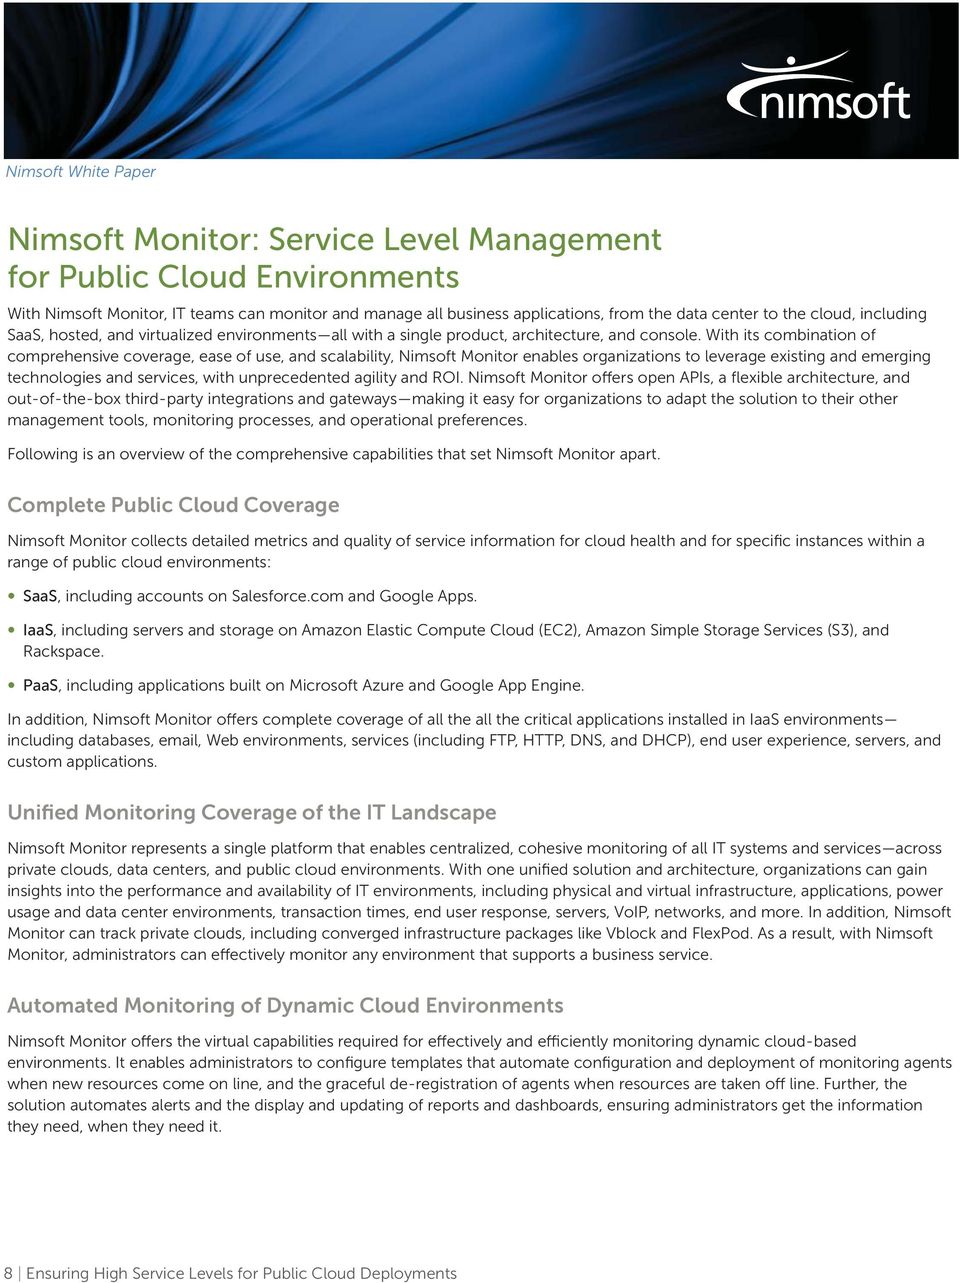 With its combination of comprehensive coverage, ease of use, and scalability, Nimsoft Monitor enables organizations to leverage existing and emerging technologies and services, with unprecedented